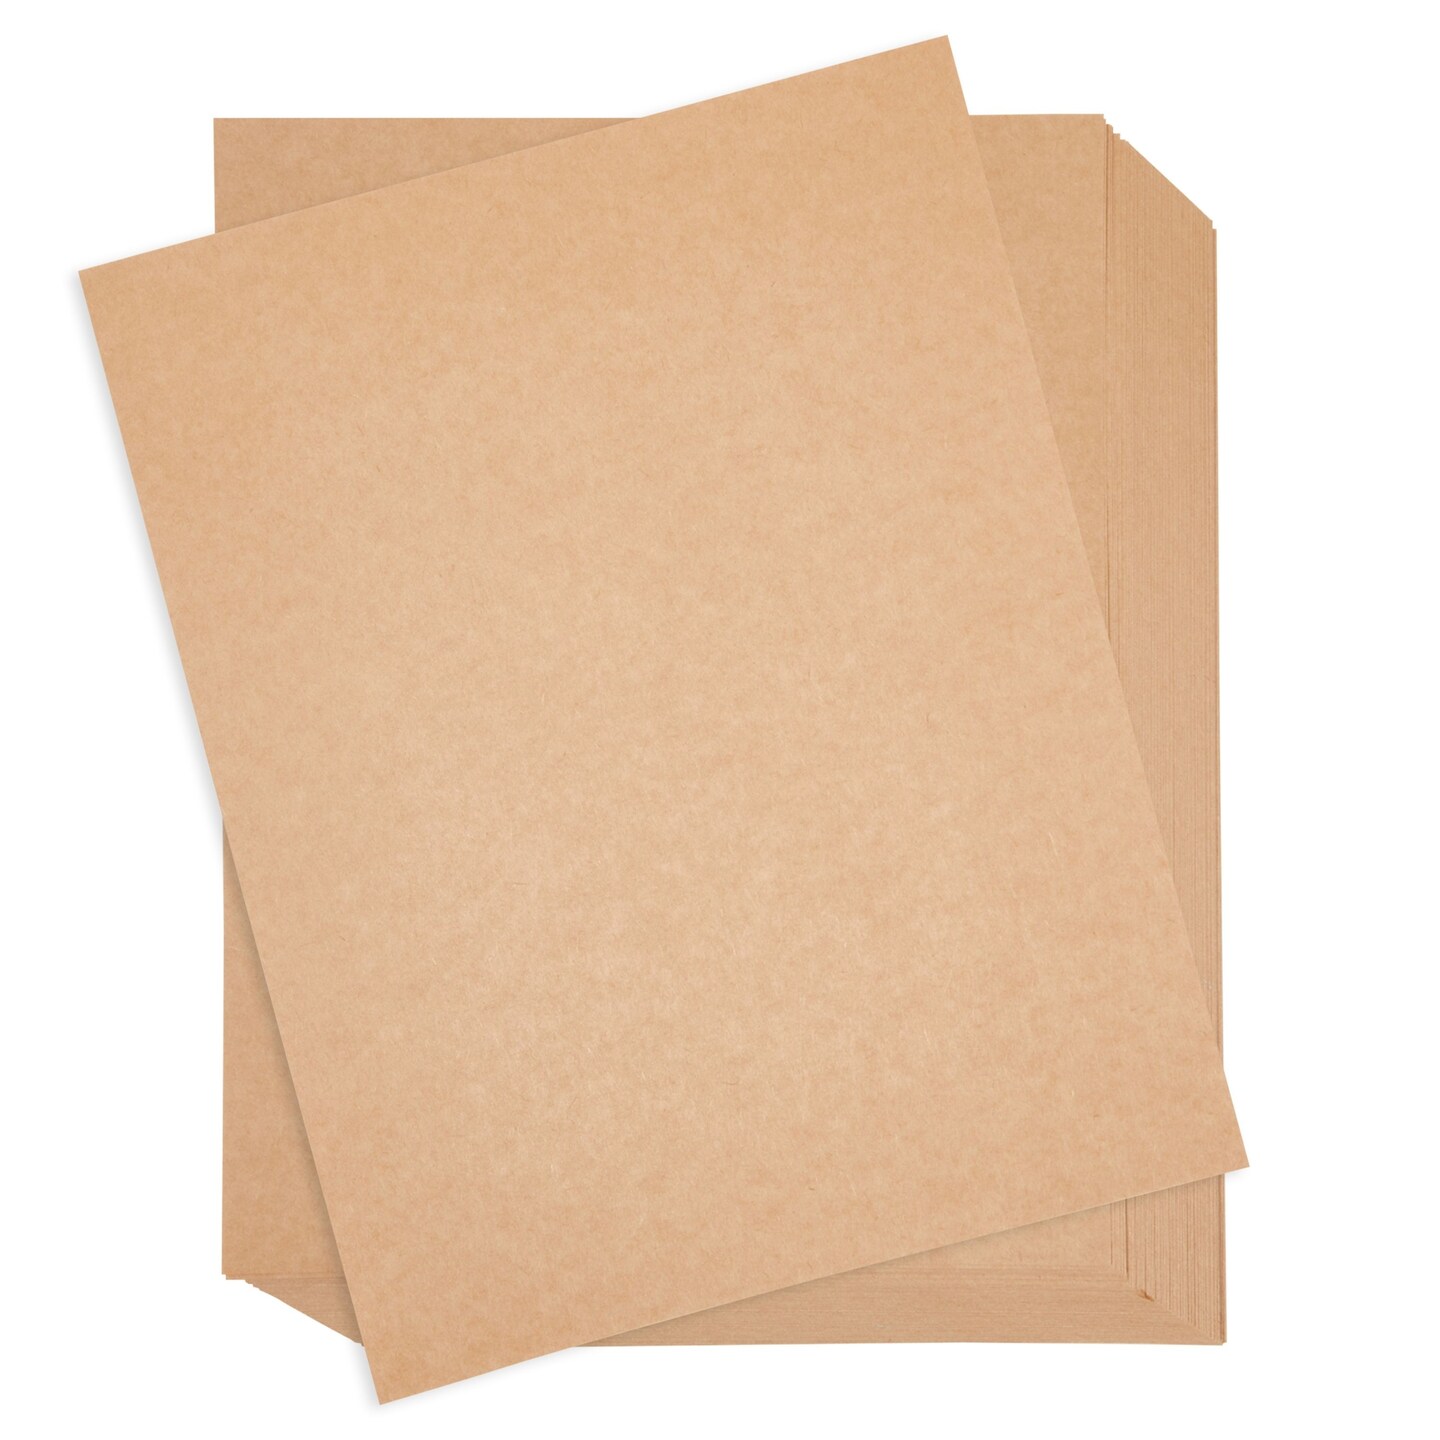 Best Paper Greetings 96 Sheets Parchment for Certificates, Beige